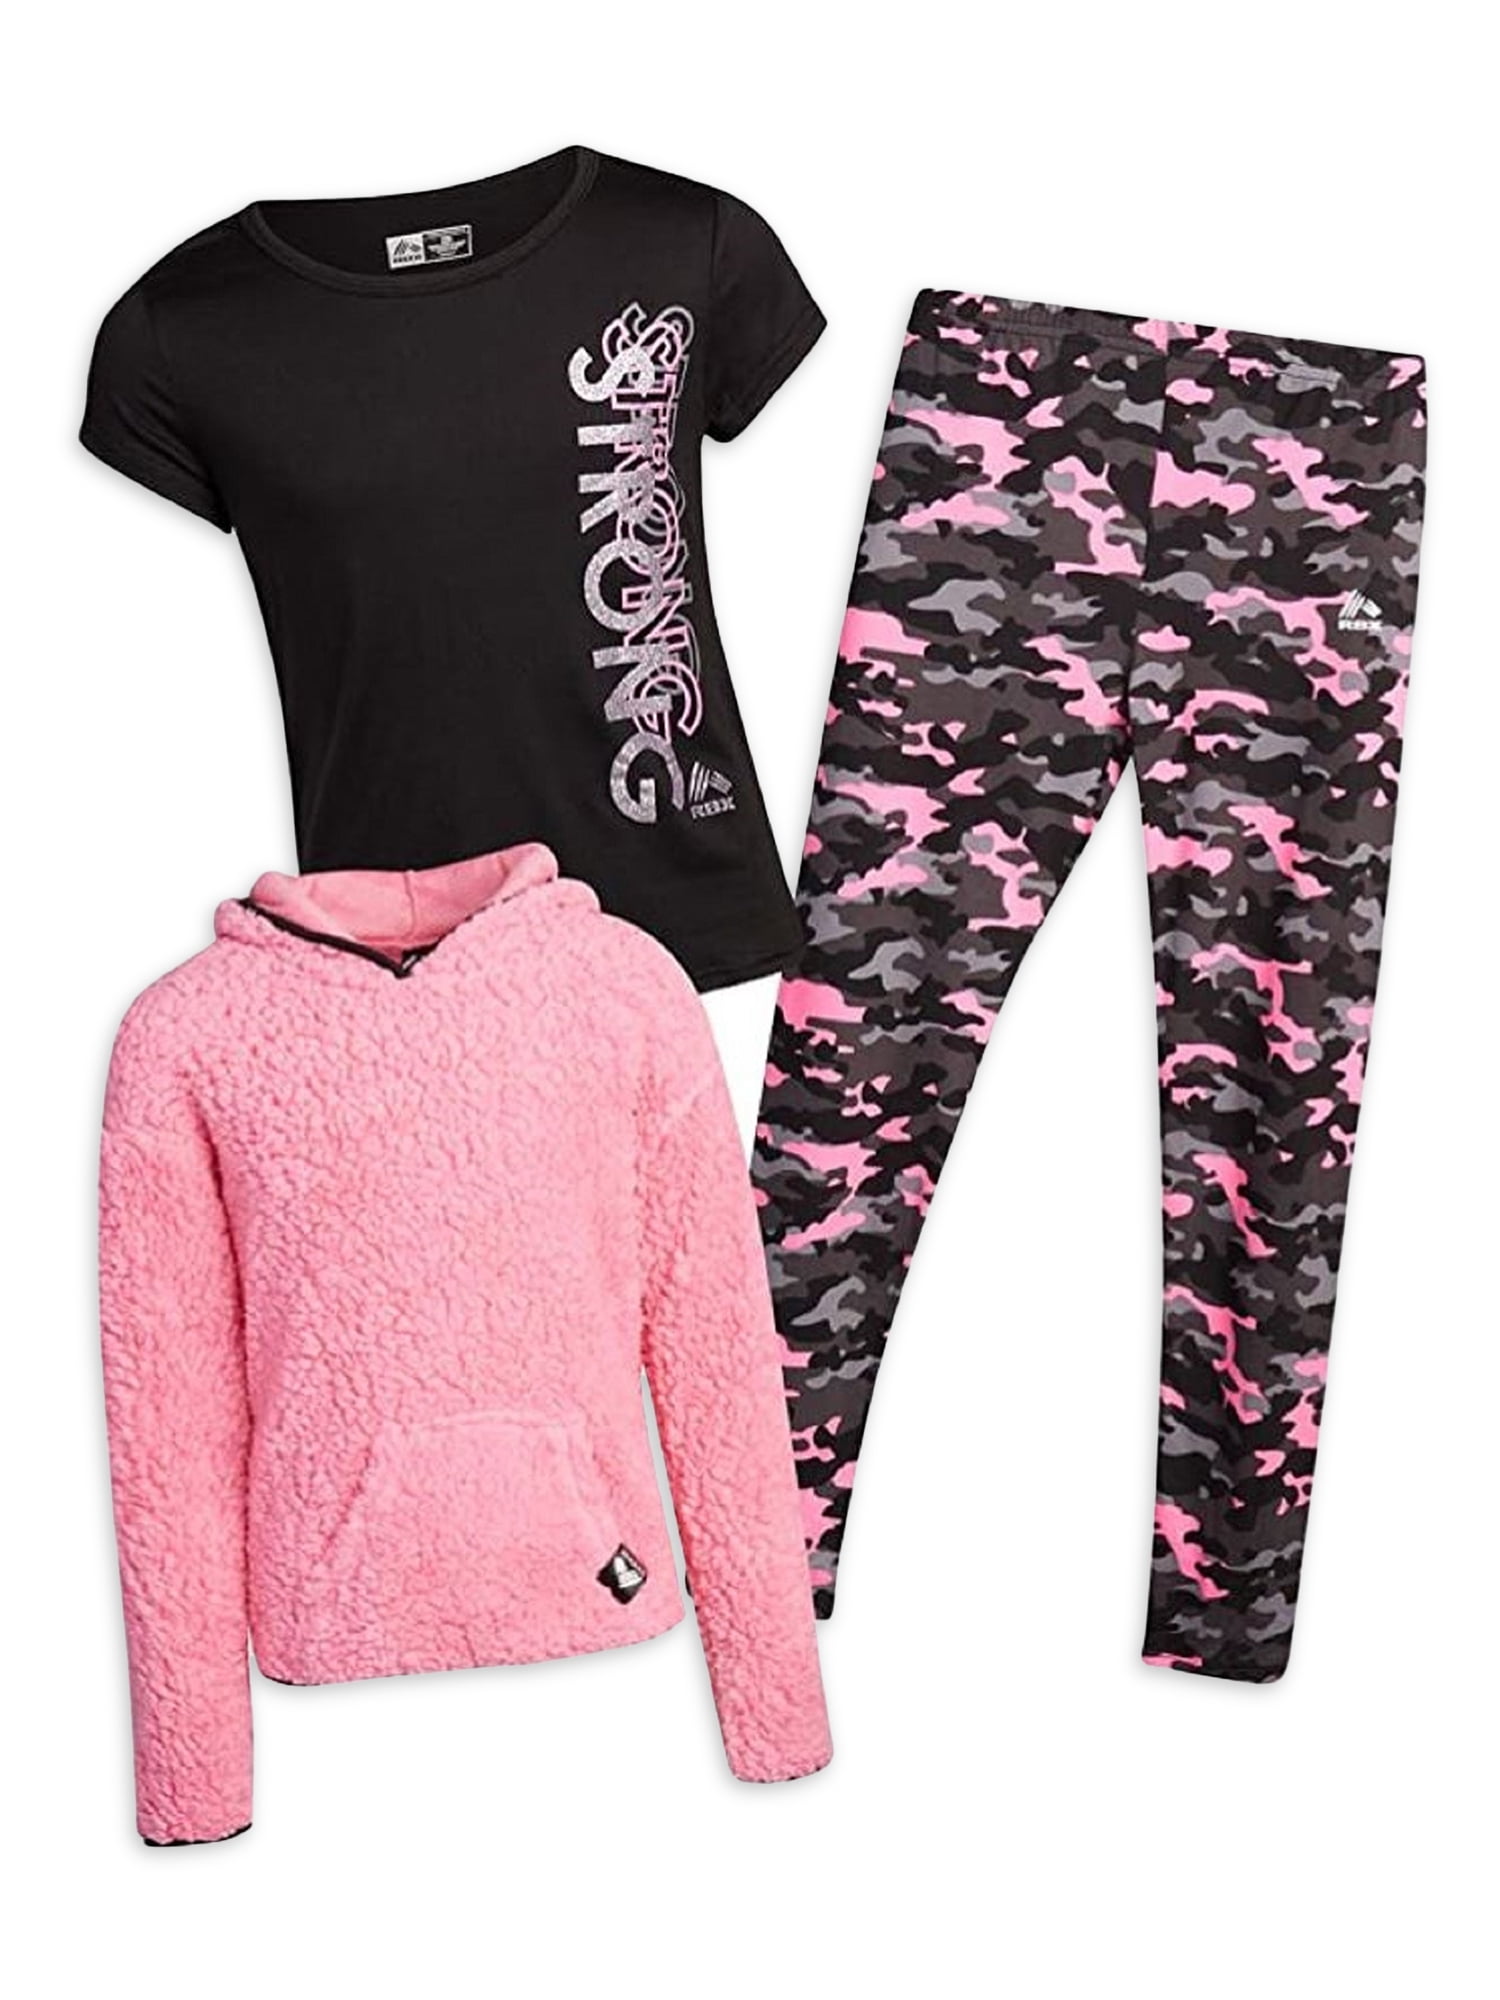 NEW Girls New York Camouflage Tracksuit Camo Top & Leggings Pink Green Age 7-13